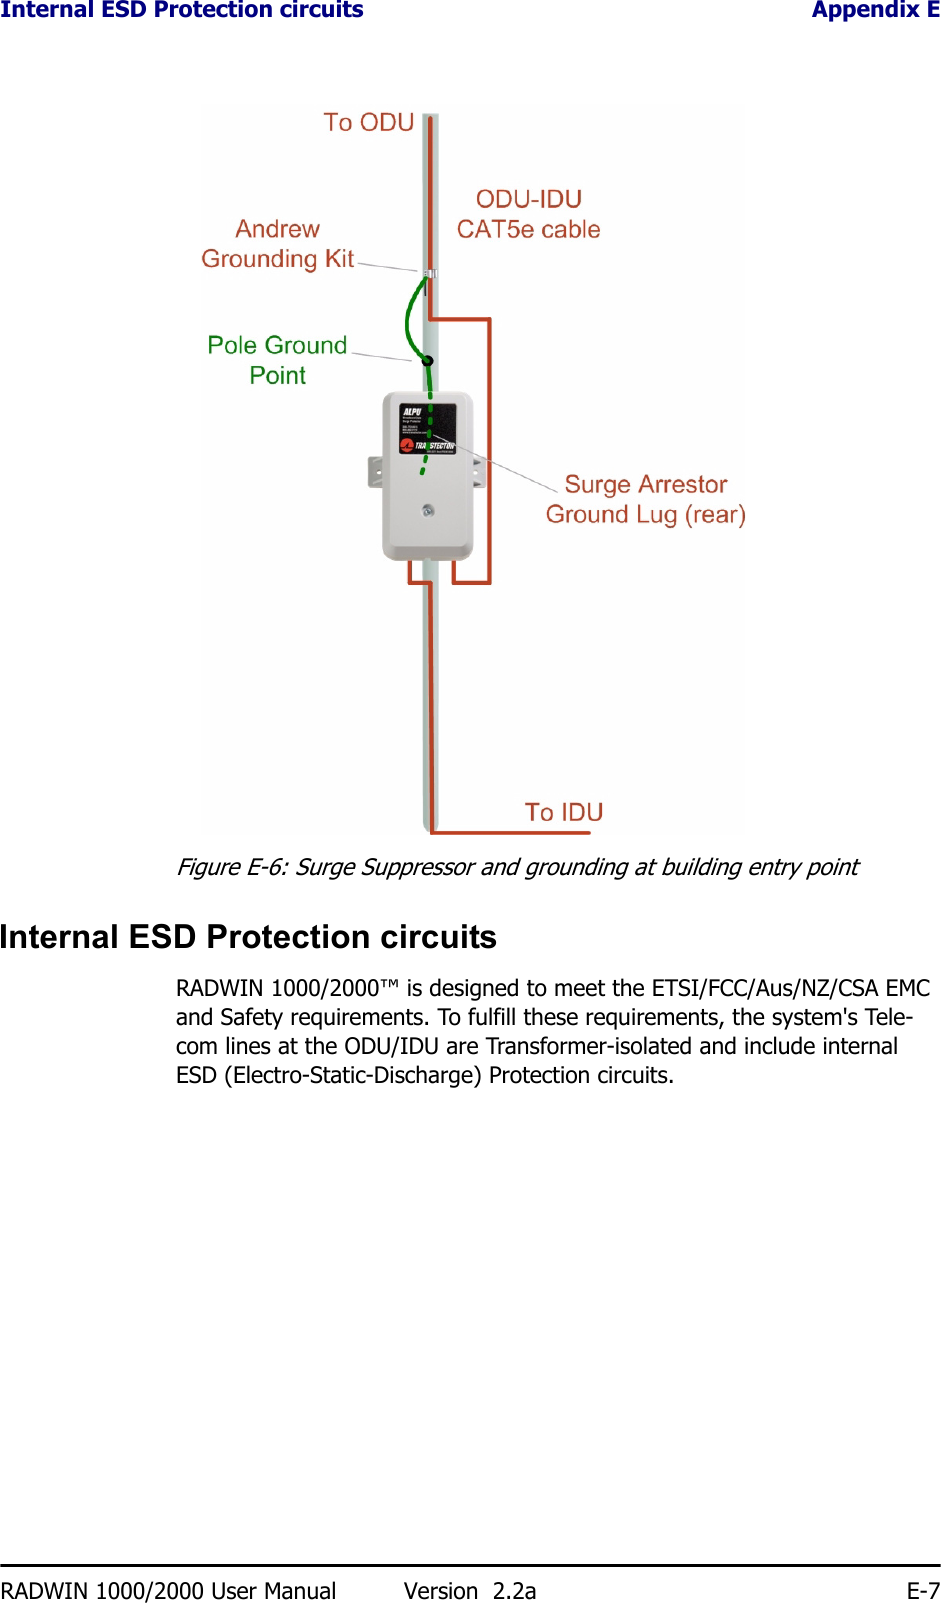 Internal ESD Protection circuits Appendix ERADWIN 1000/2000 User Manual Version  2.2a E-7Figure E-6: Surge Suppressor and grounding at building entry pointInternal ESD Protection circuitsRADWIN 1000/2000™ is designed to meet the ETSI/FCC/Aus/NZ/CSA EMC and Safety requirements. To fulfill these requirements, the system&apos;s Tele-com lines at the ODU/IDU are Transformer-isolated and include internal ESD (Electro-Static-Discharge) Protection circuits.